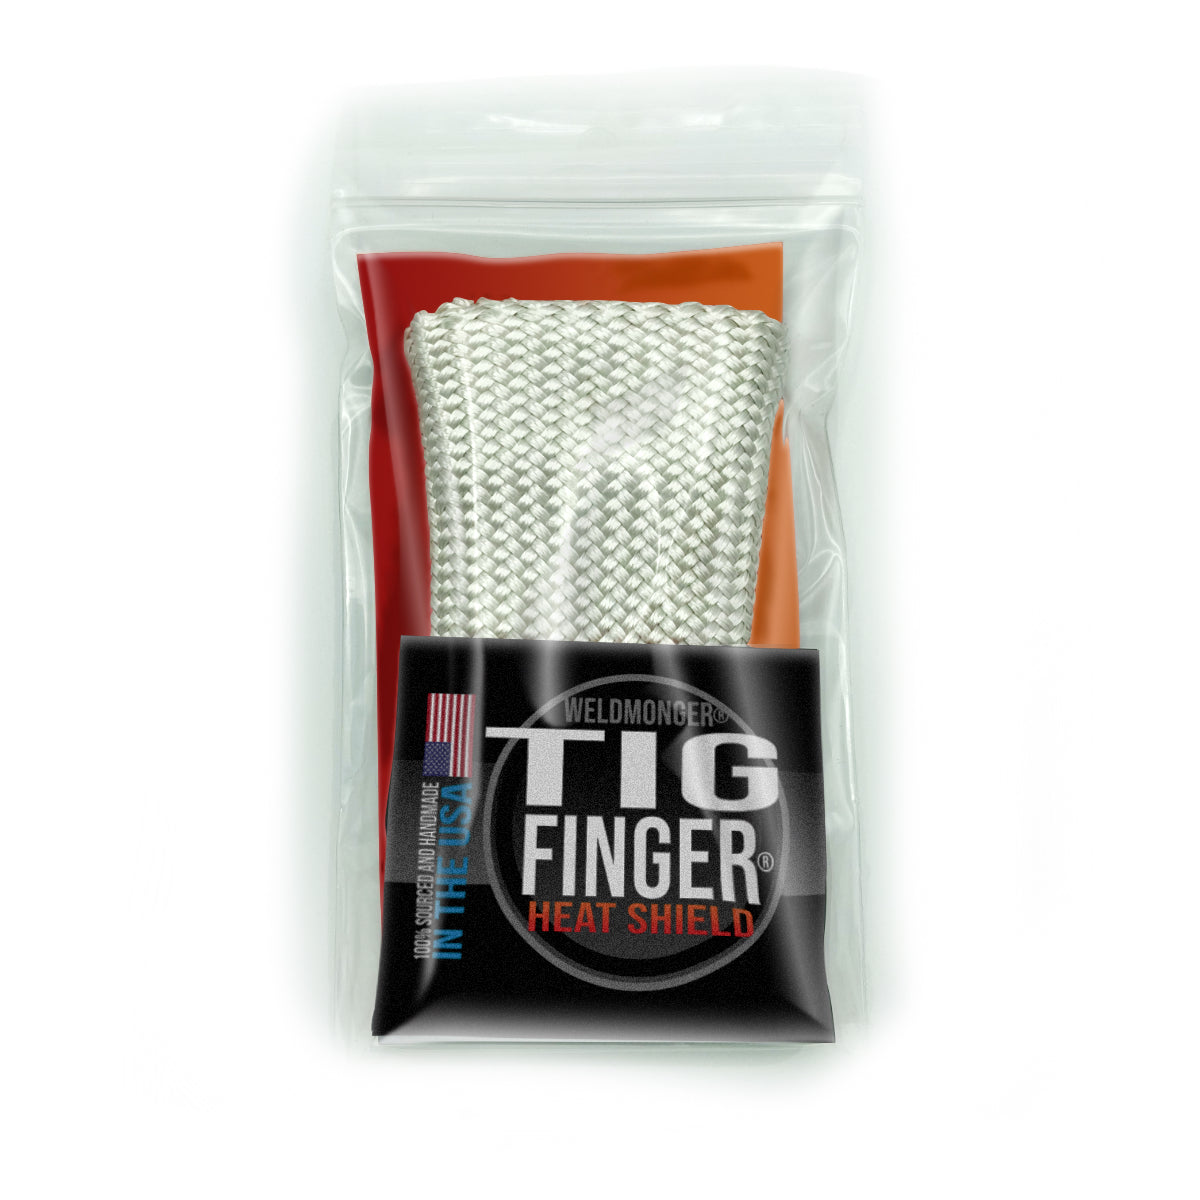 Finger Guard For Cutting Review 2020 - Does It Work? 